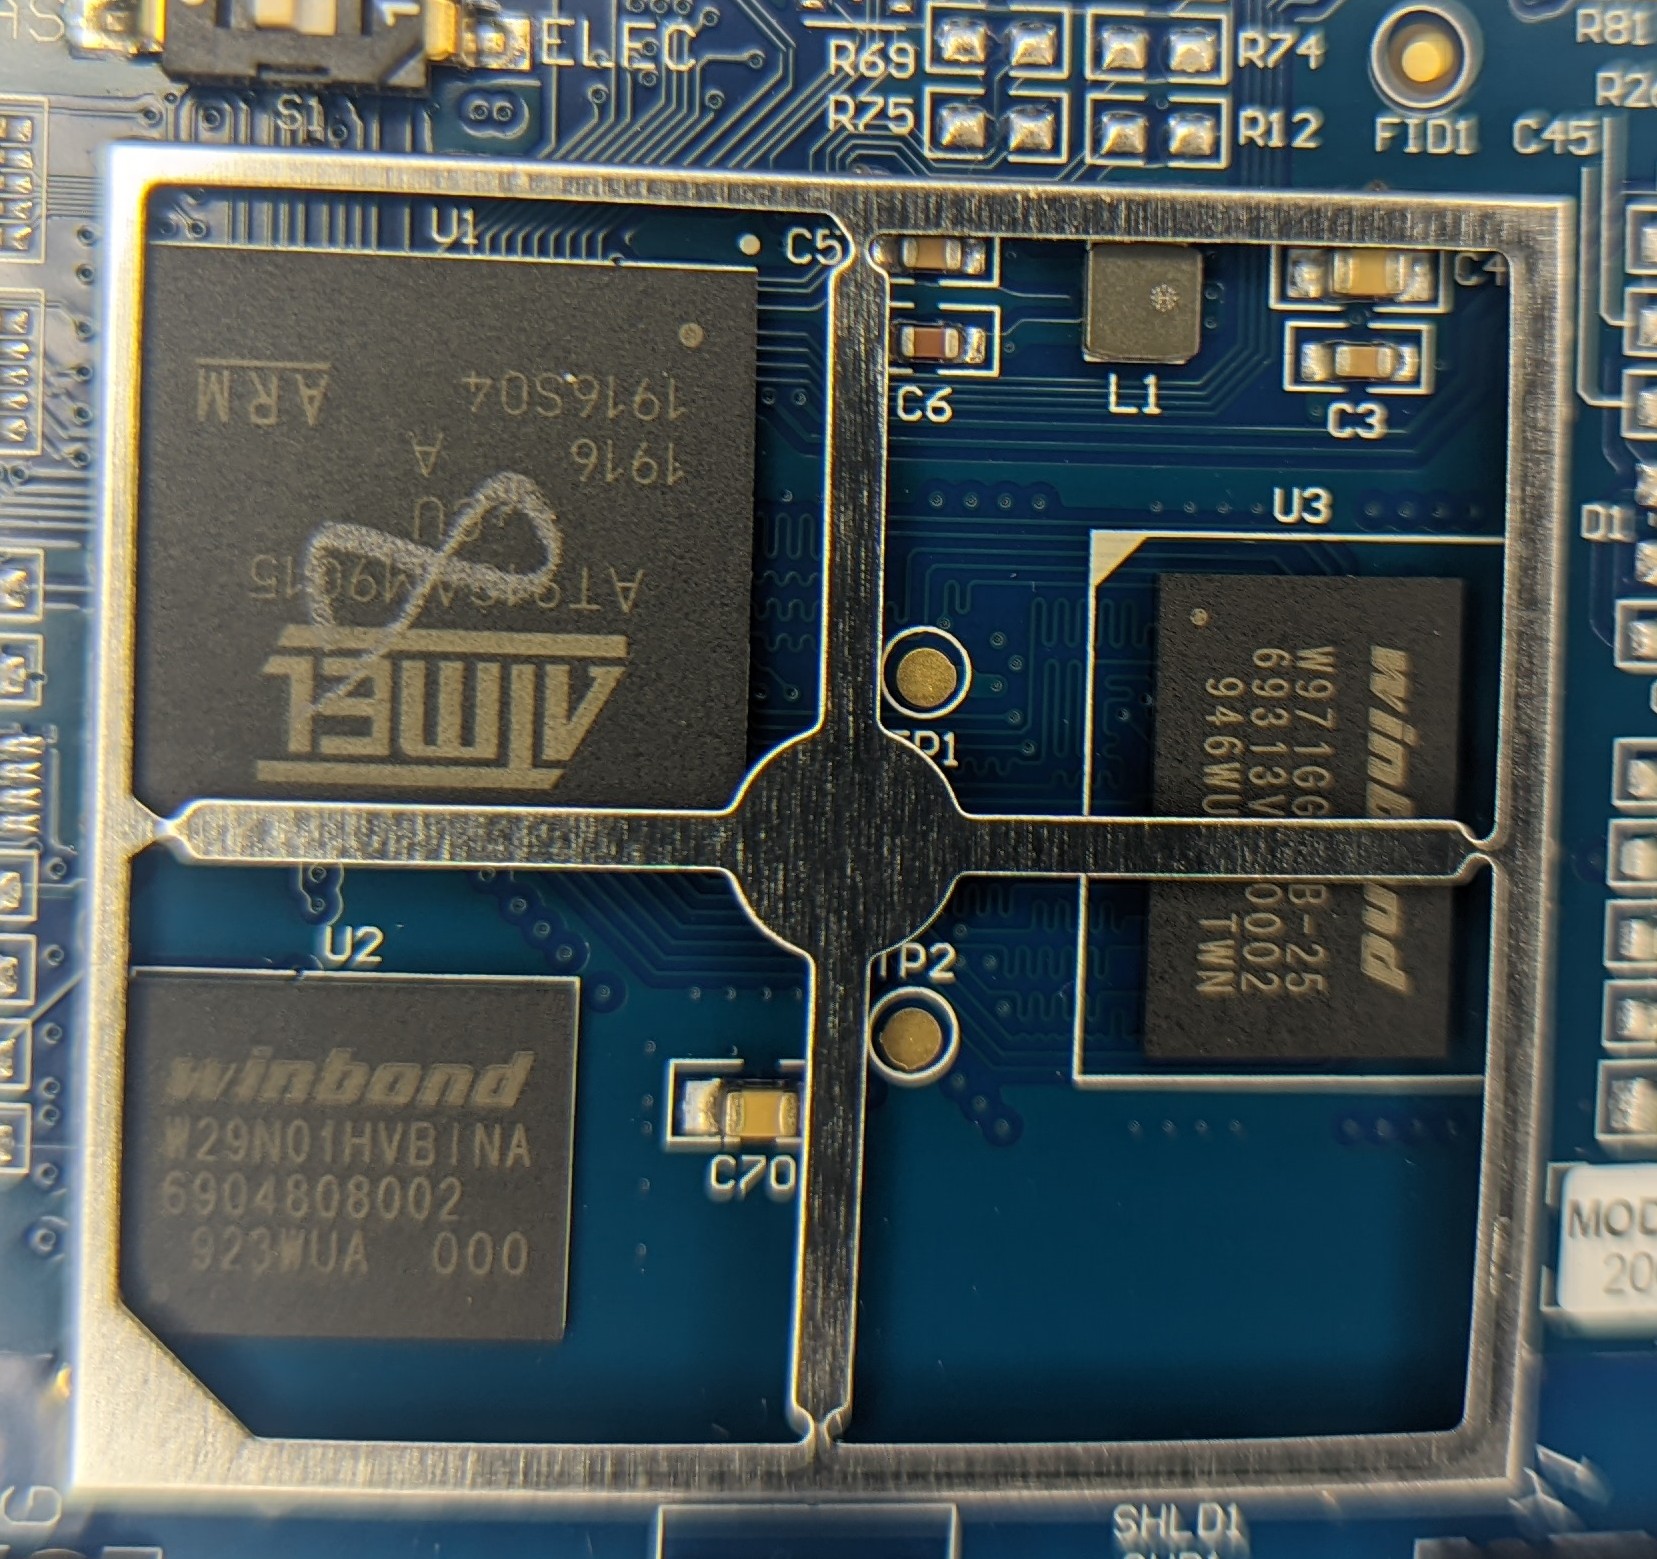 Closeup photo showing the main application processor and supporting ICs